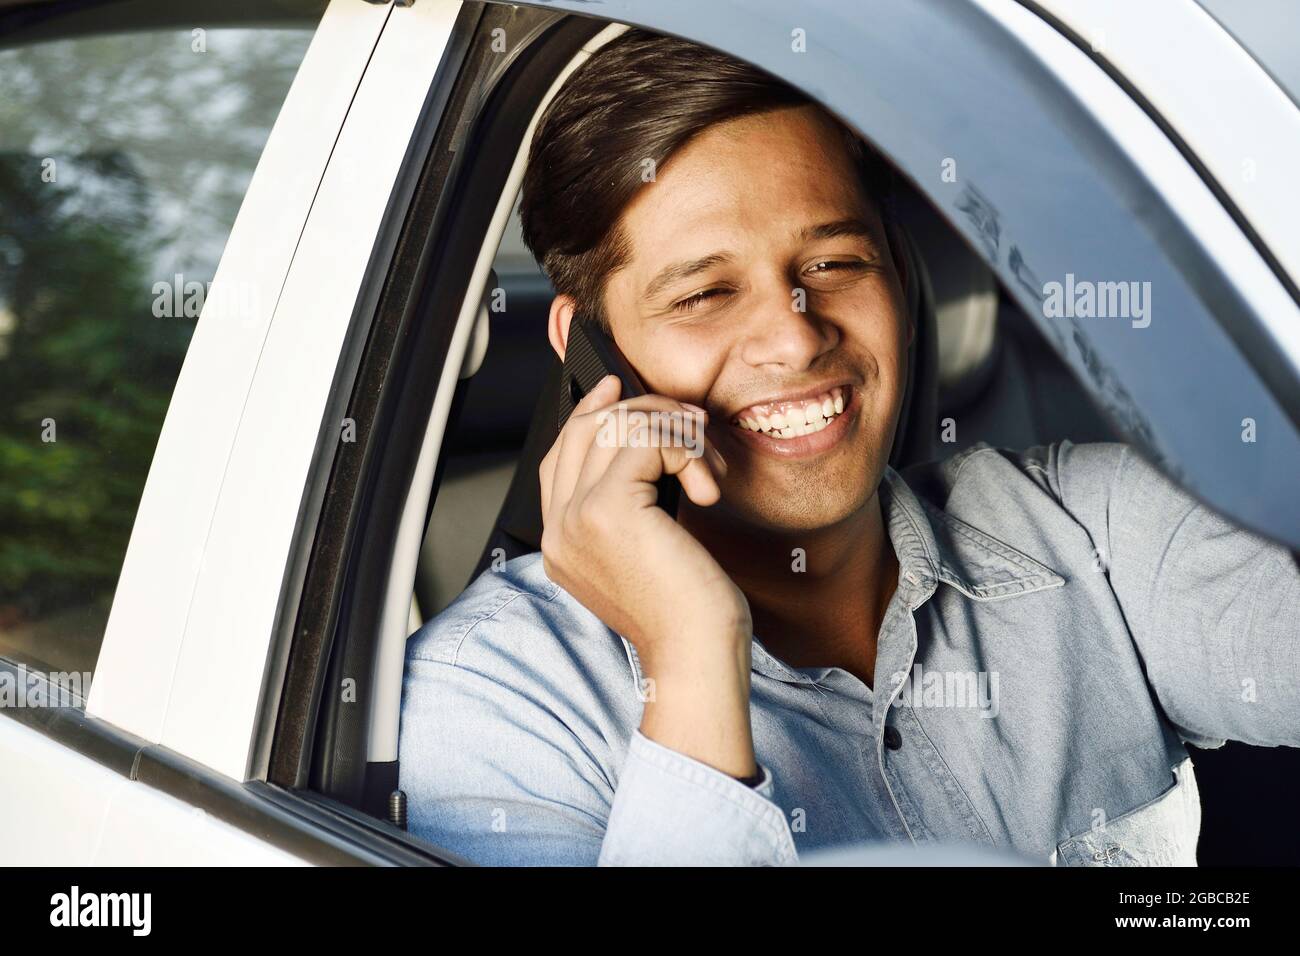 Indian Cab driver Taking On Phone While Driving Stock Photo